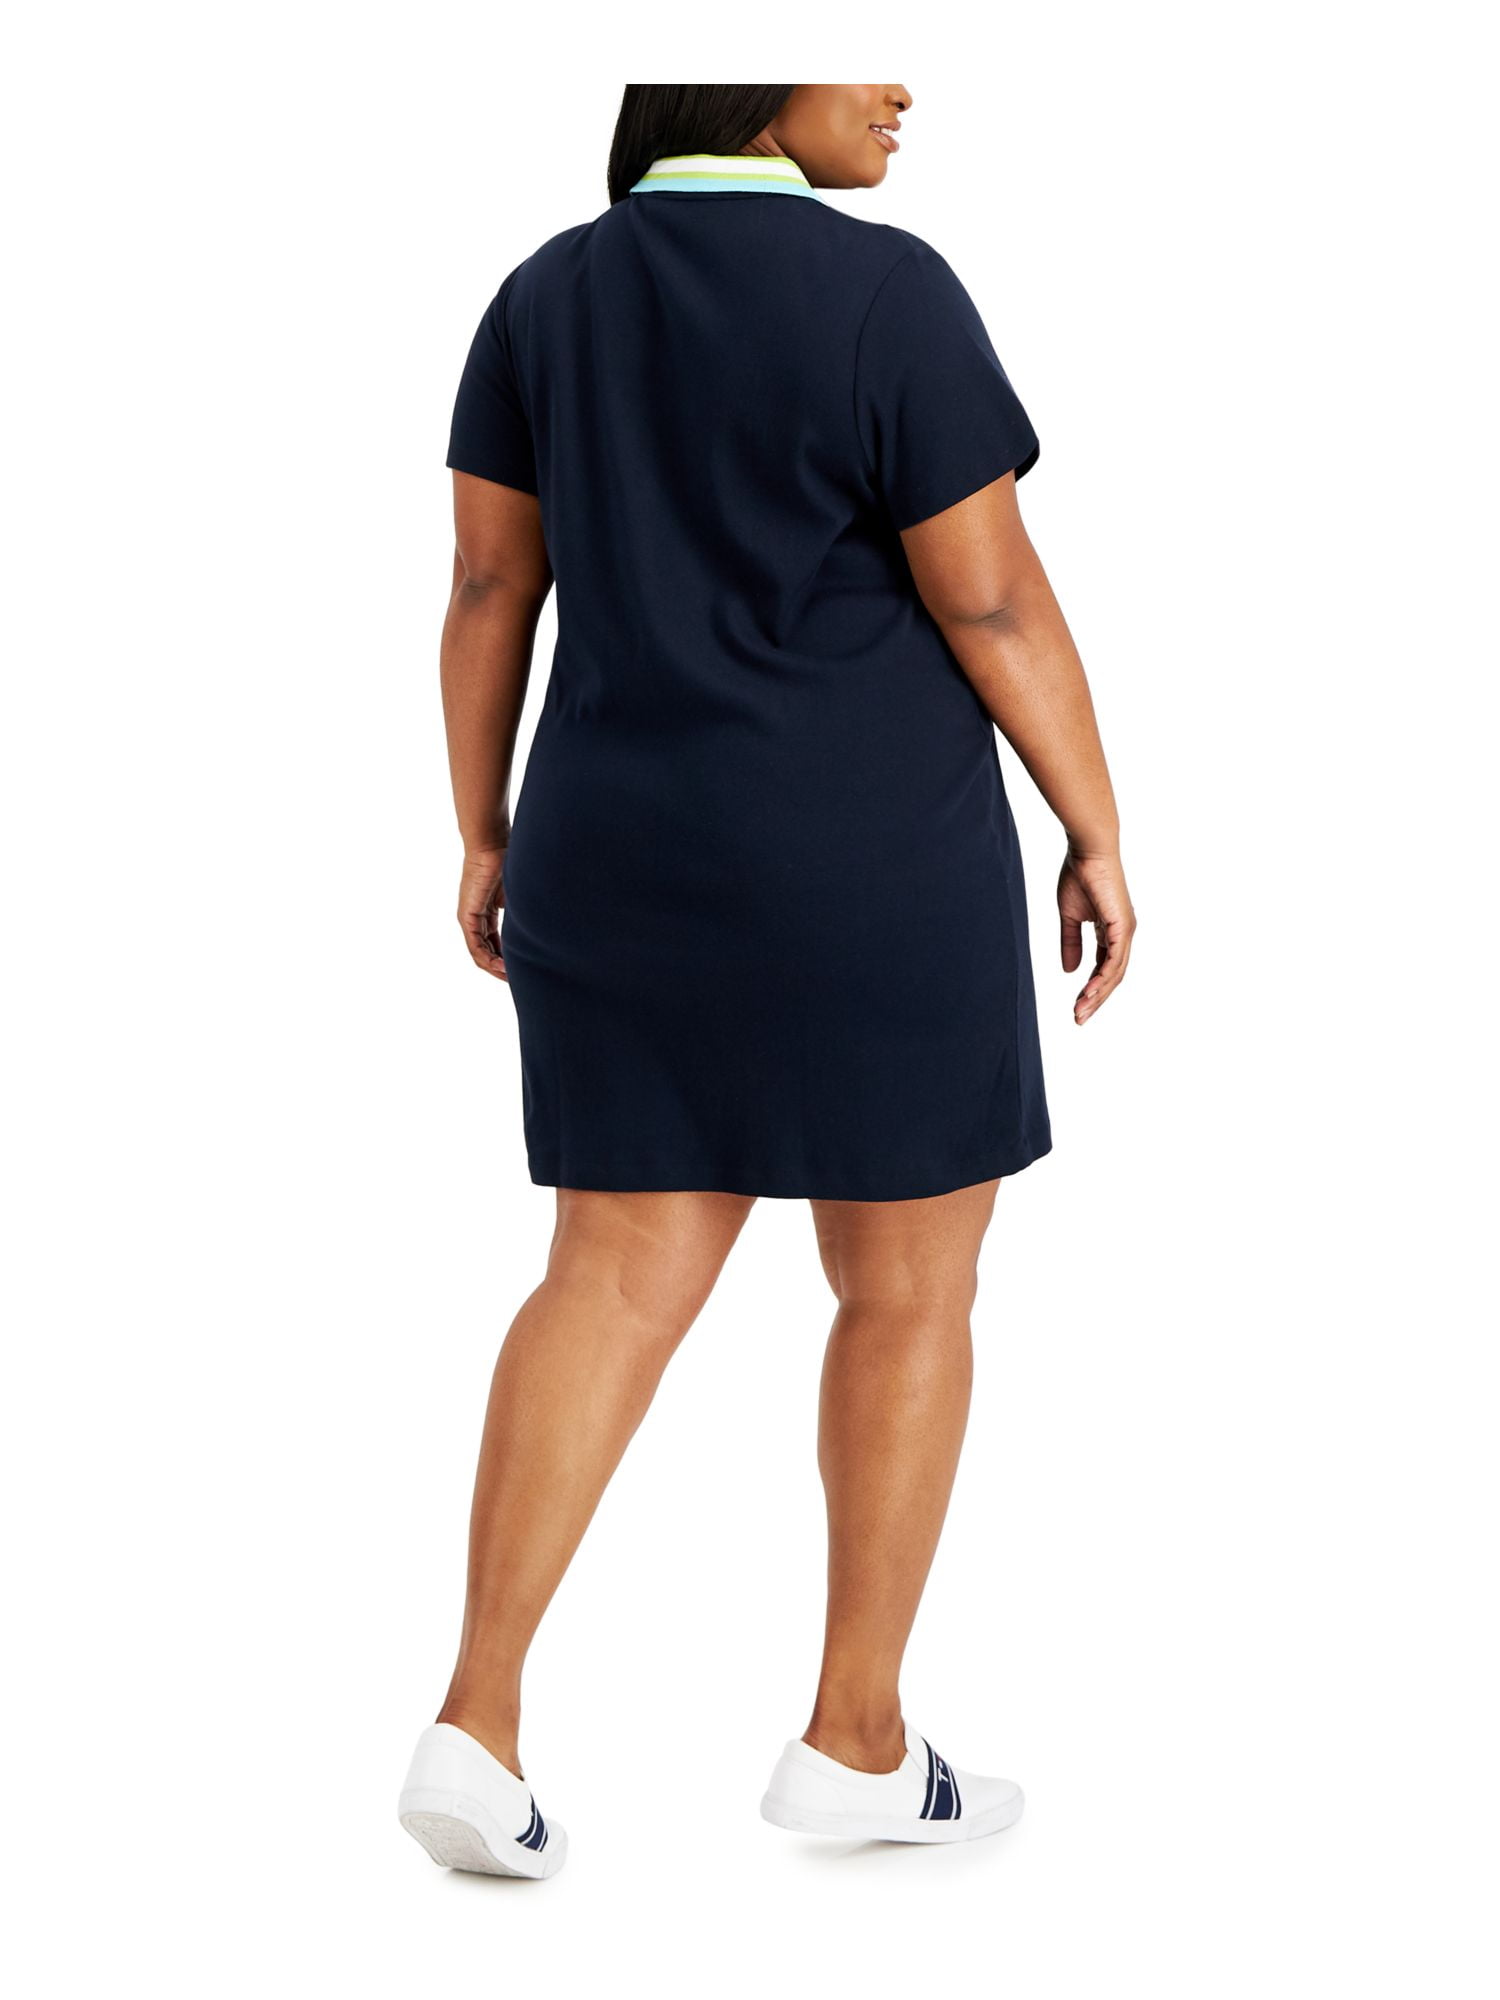 Unlined Above Navy 1X The Womens Logo Sleeve Collared Embroidered Plus Color HILFIGER Block Polo Short TOMMY Dress Dress Ribbed Knee